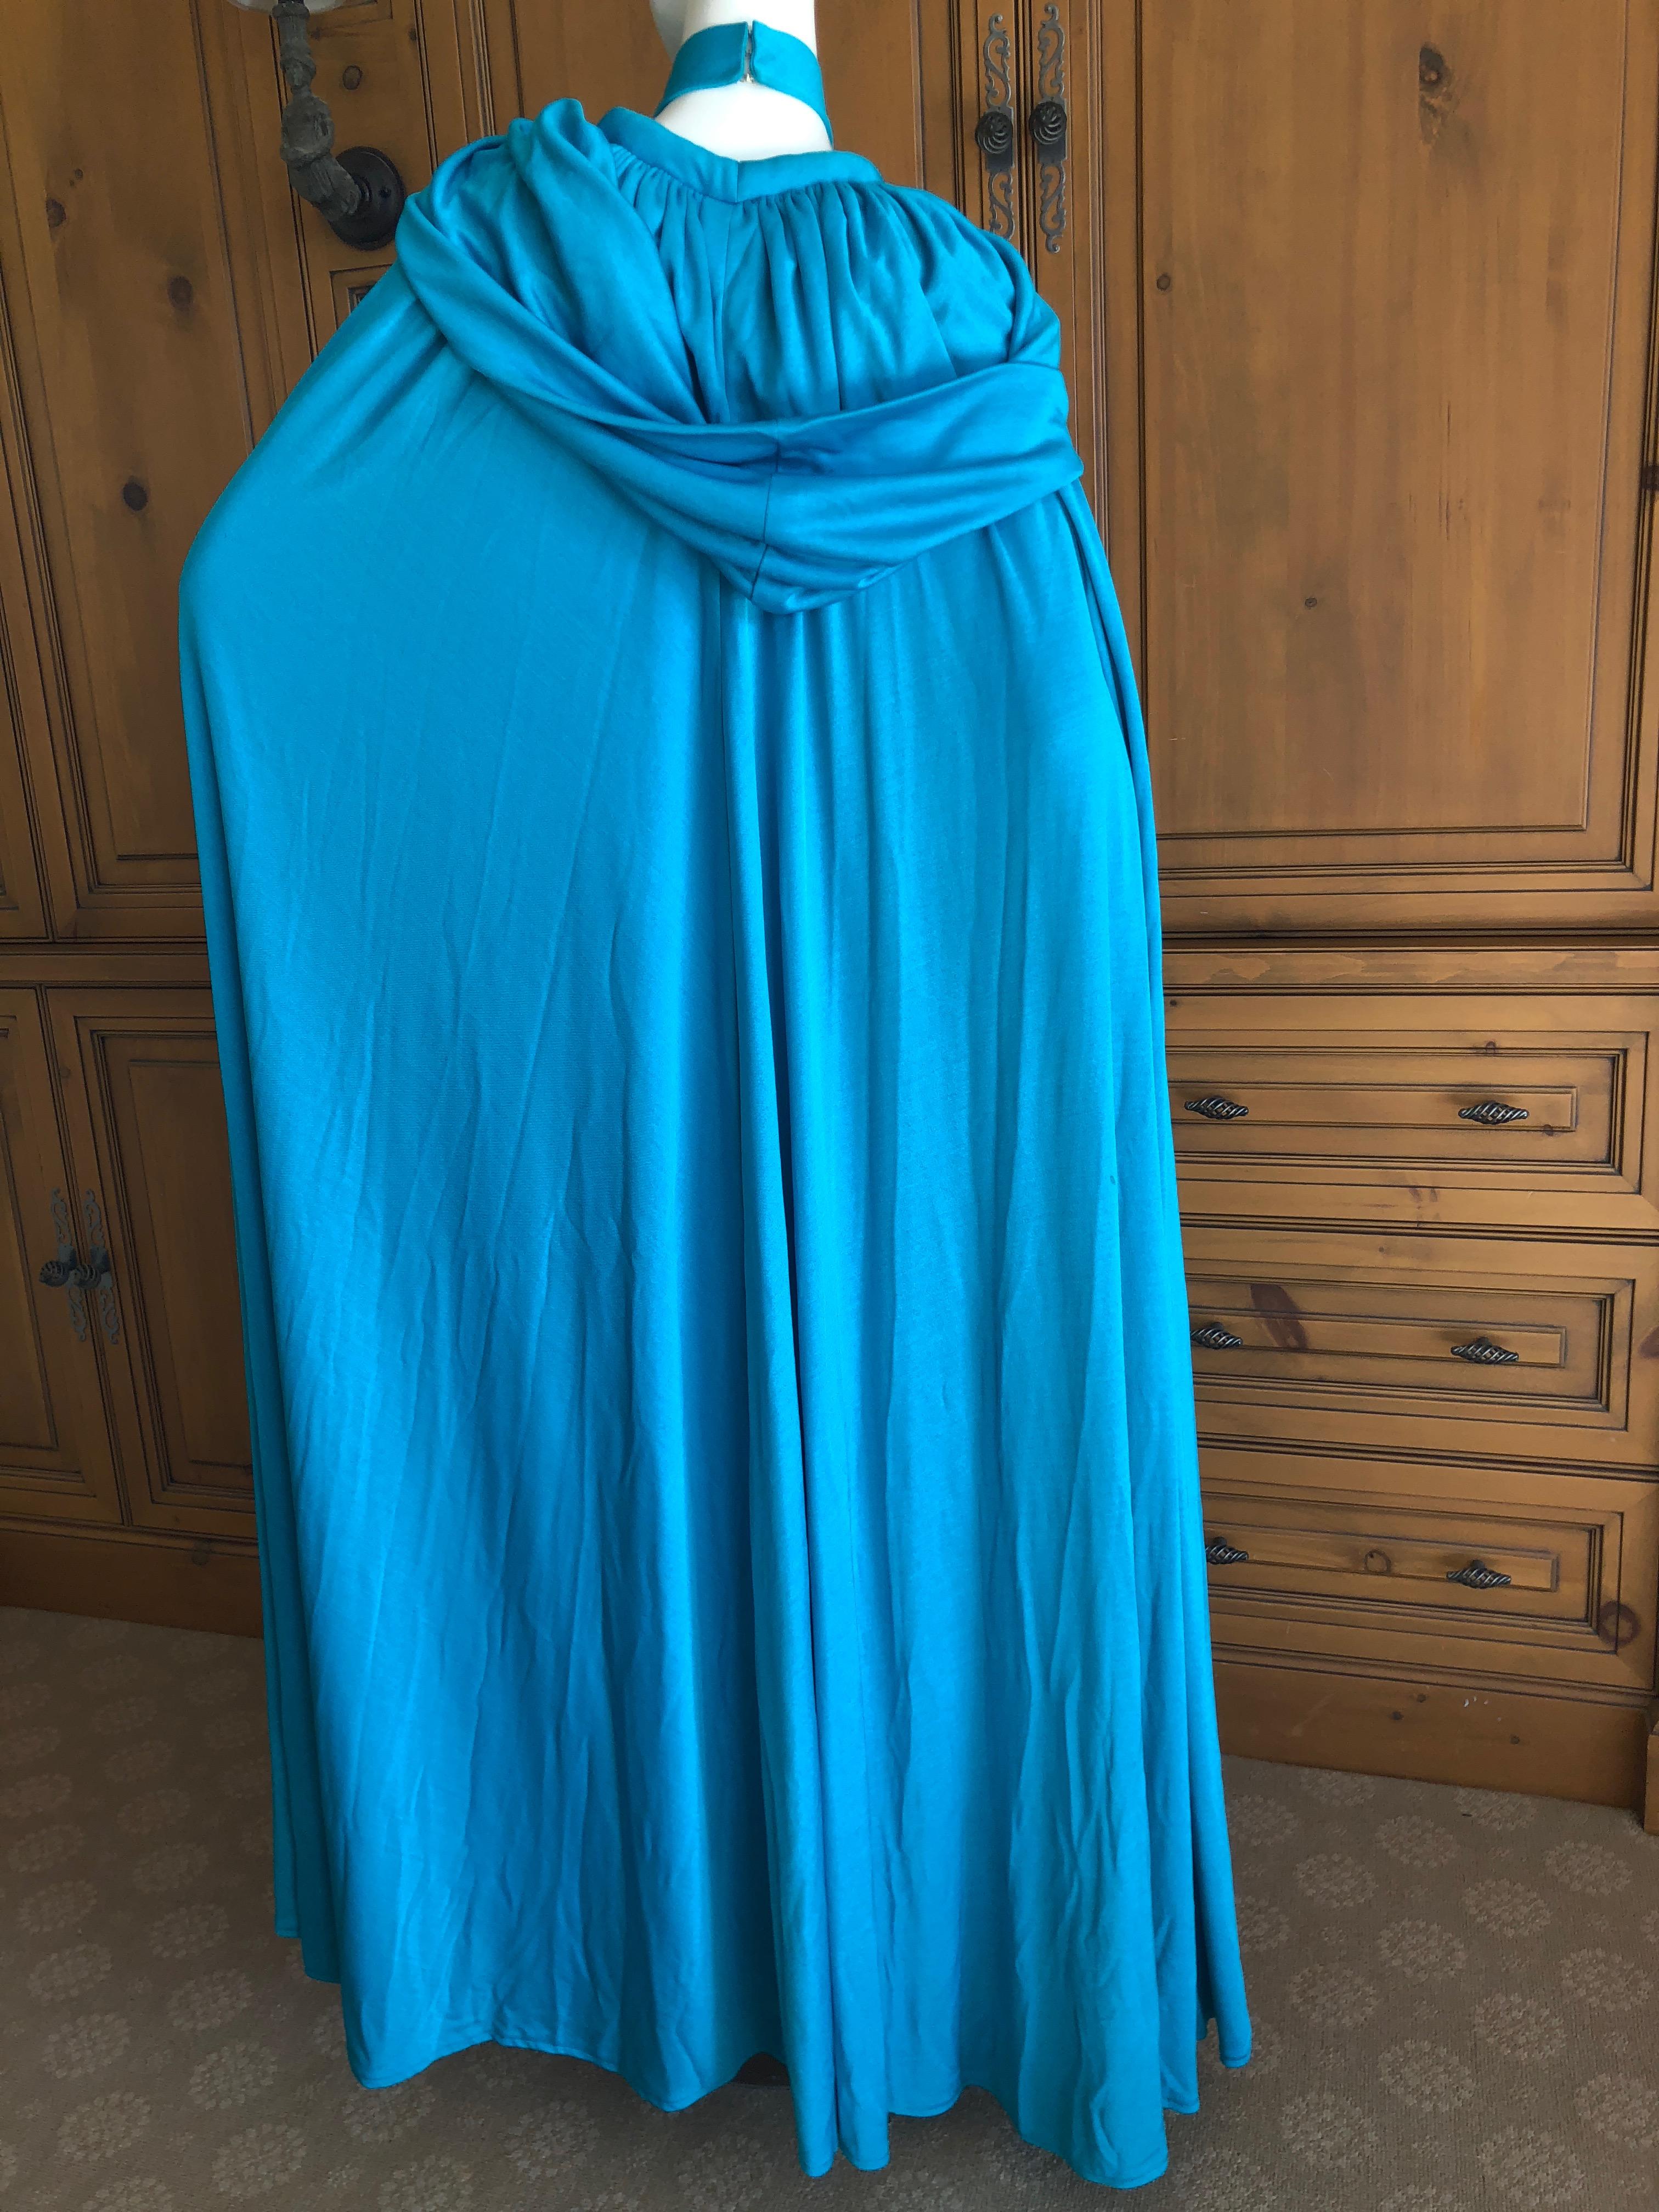 Loris Azzaro Couture 1970s Sheer Sequin Accented Turquoise Blue Dress and Cape 6